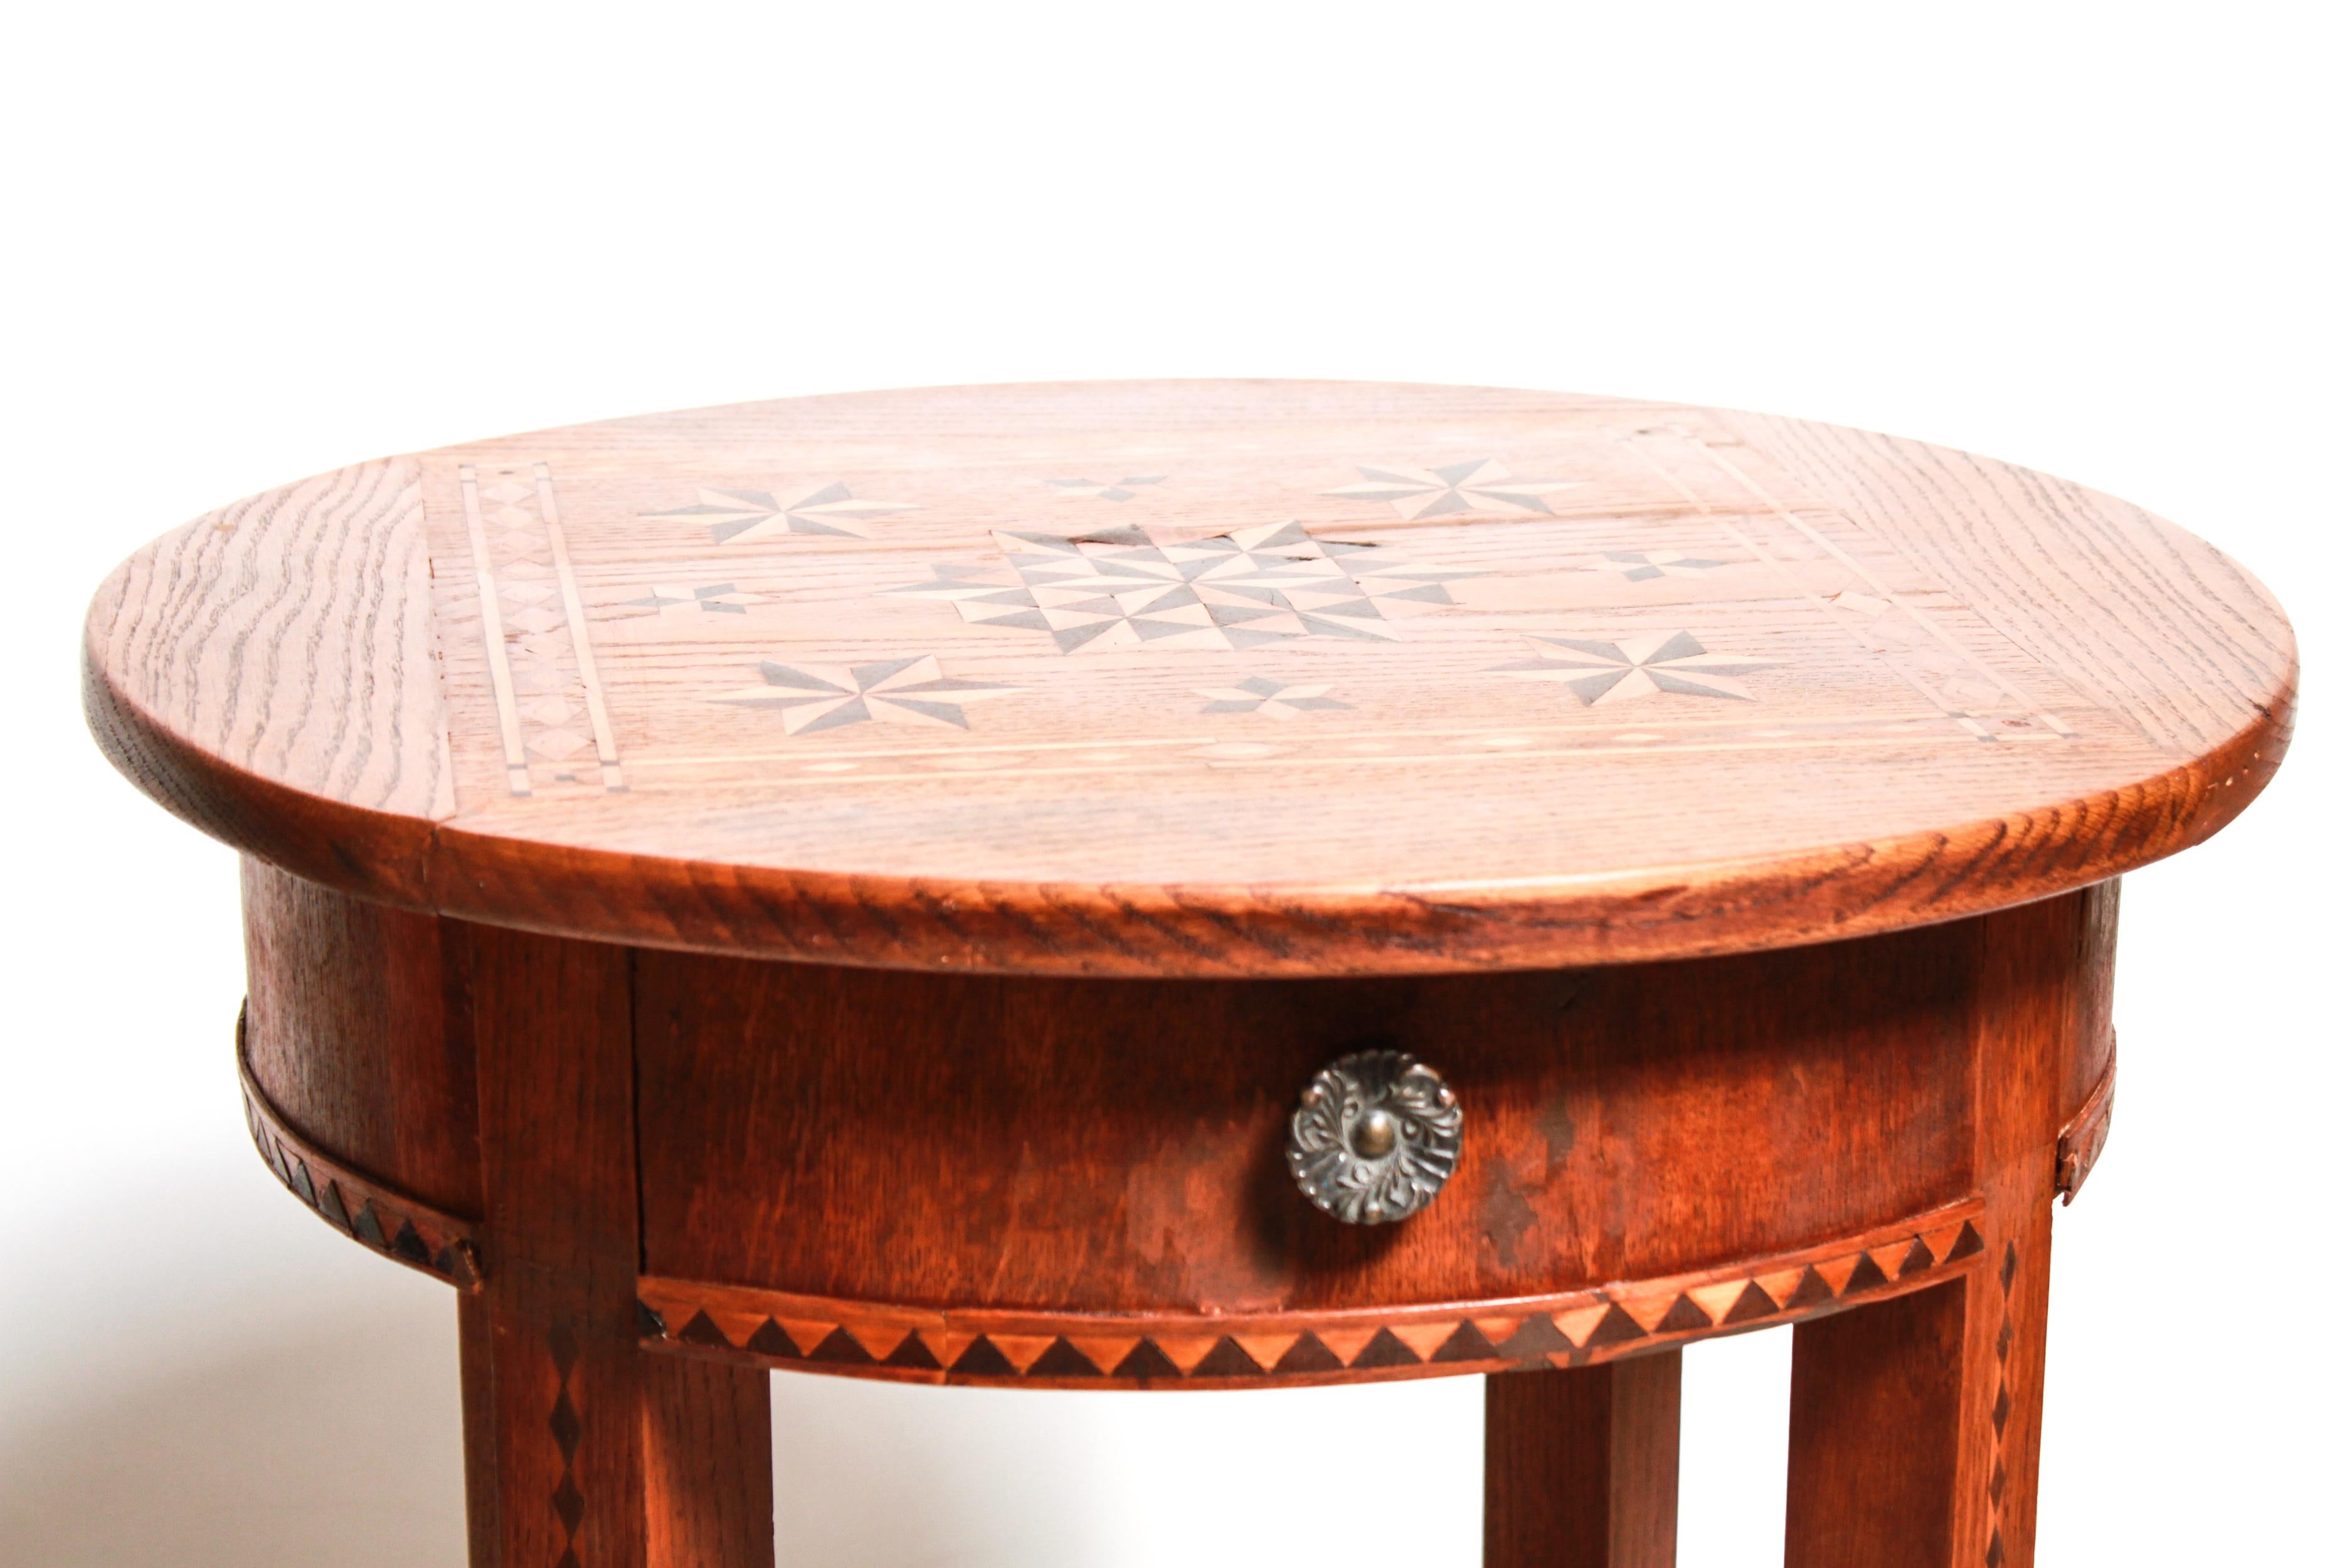 Swiss Rustic Side Table with Geometric Parquetry 3